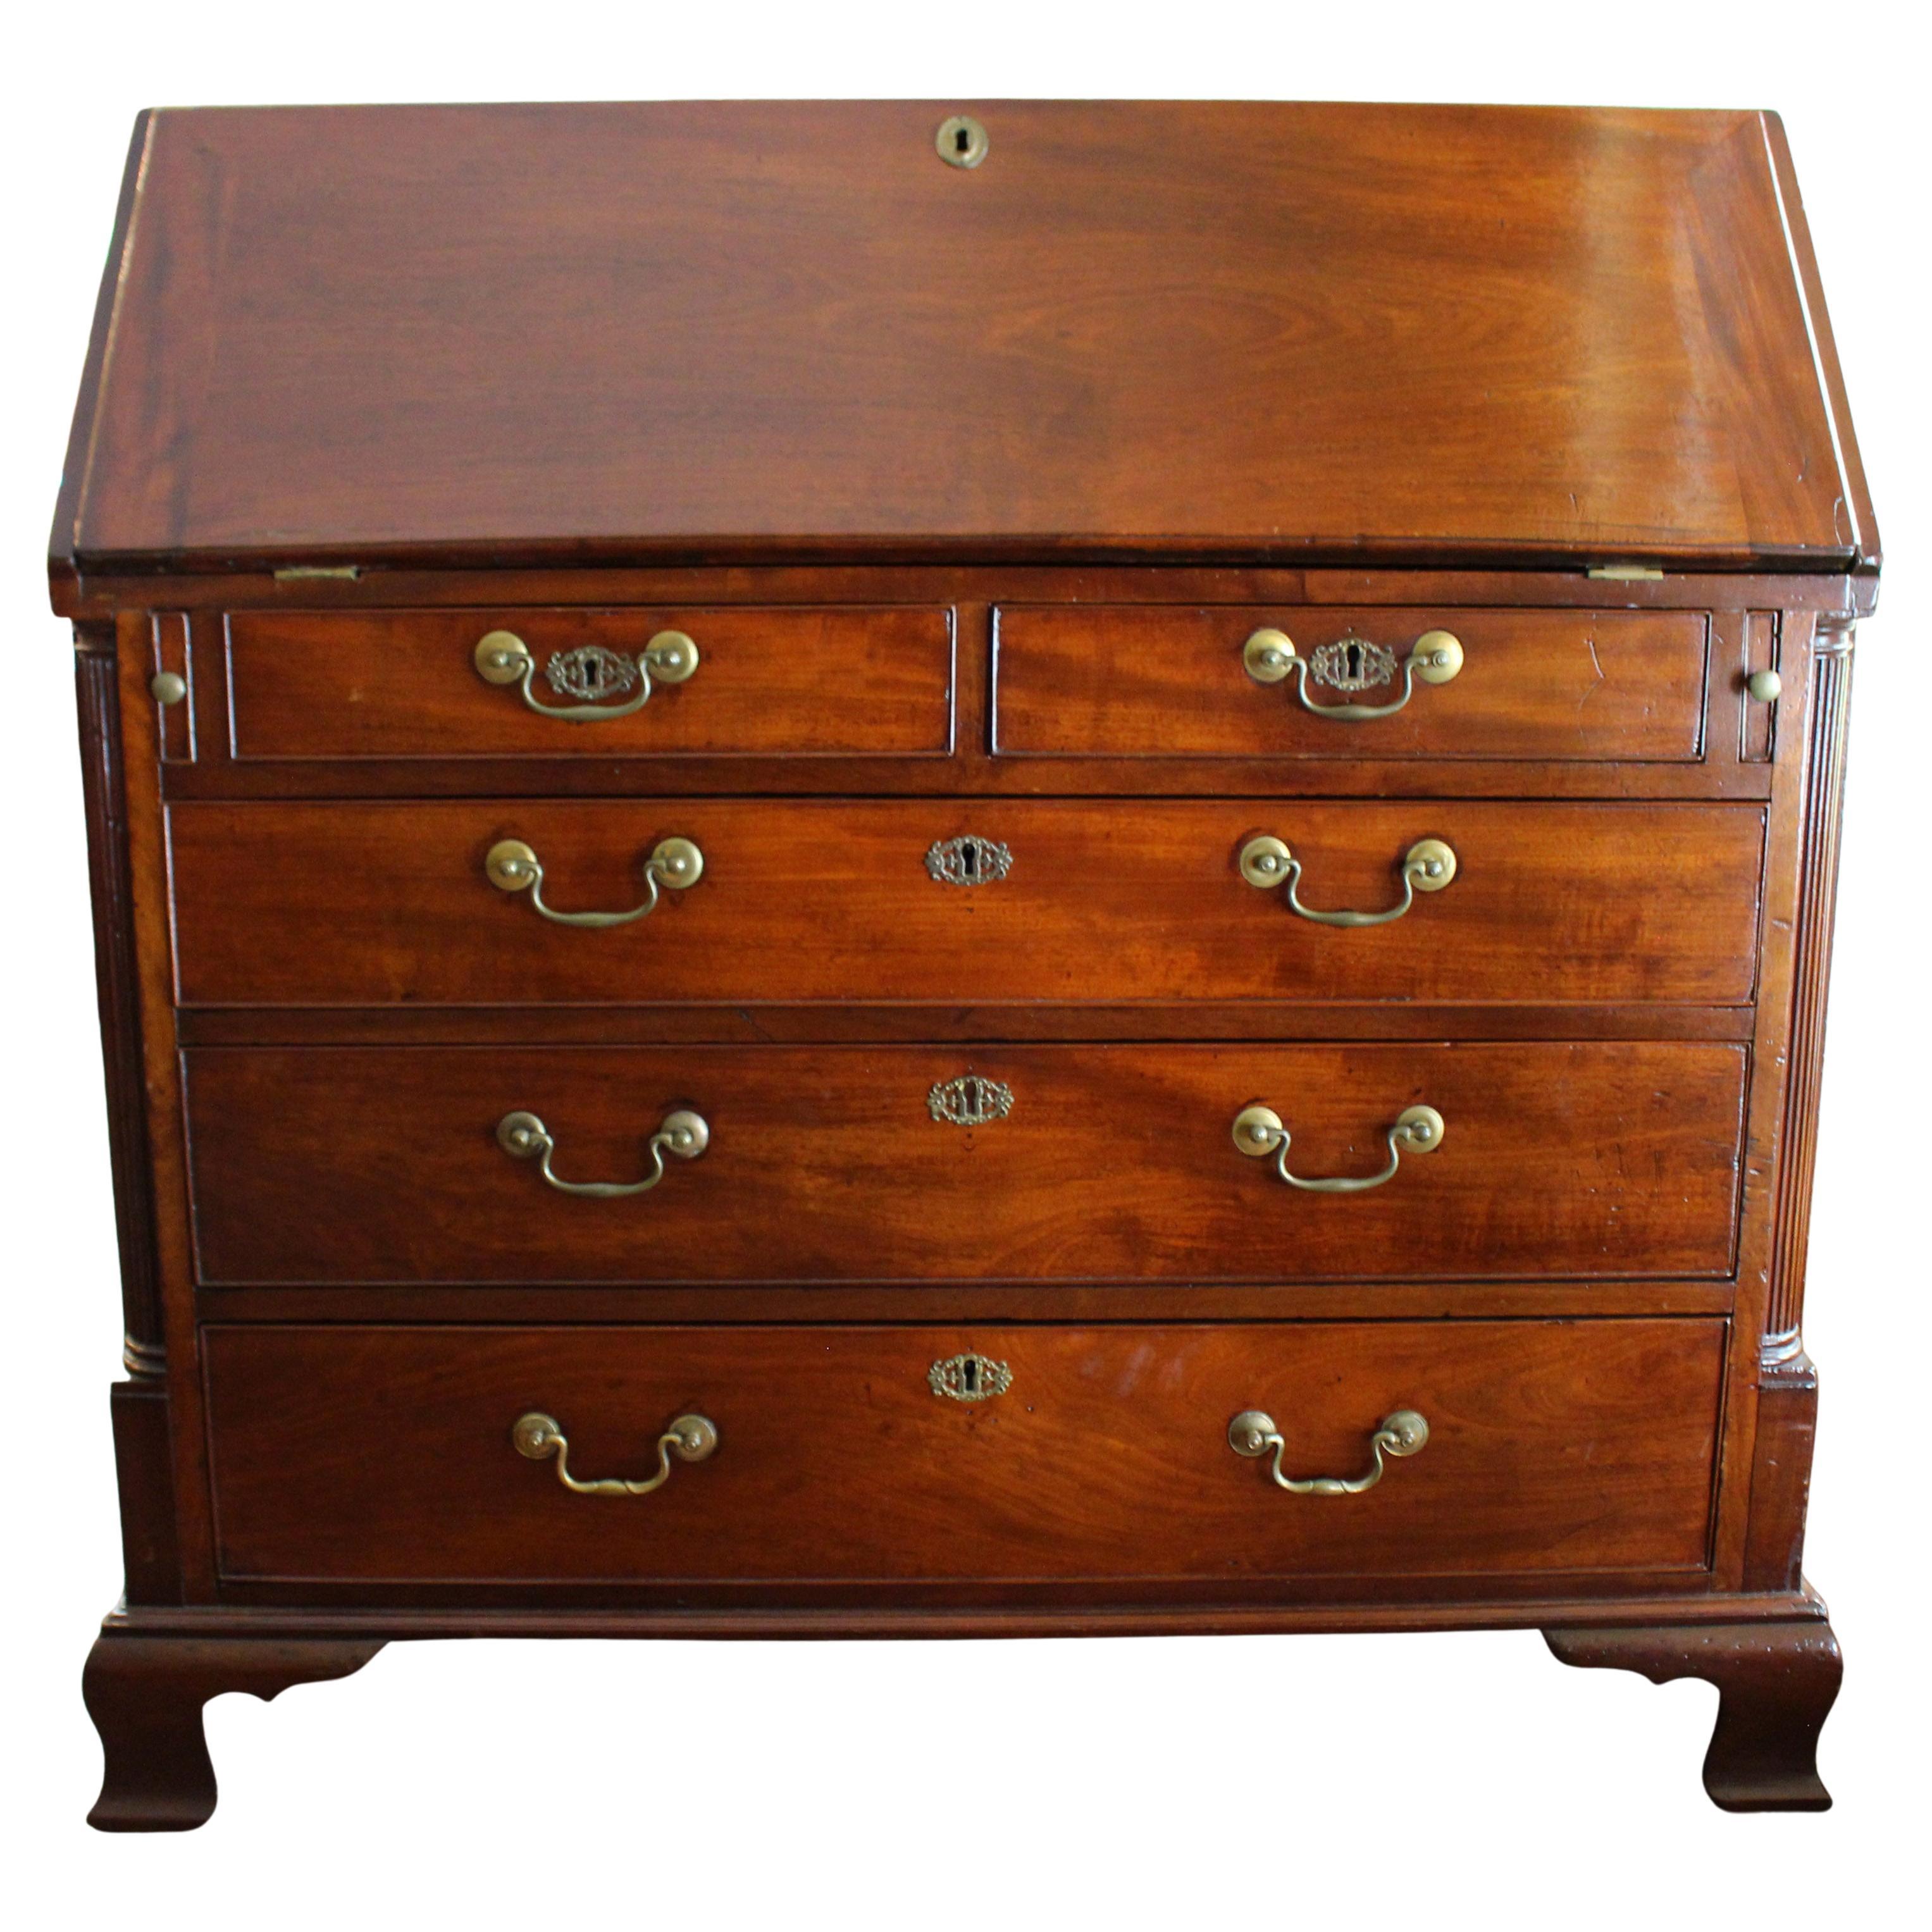 George III Mahogany Slant Front Bureau with Chippendale Gothic Style Accents